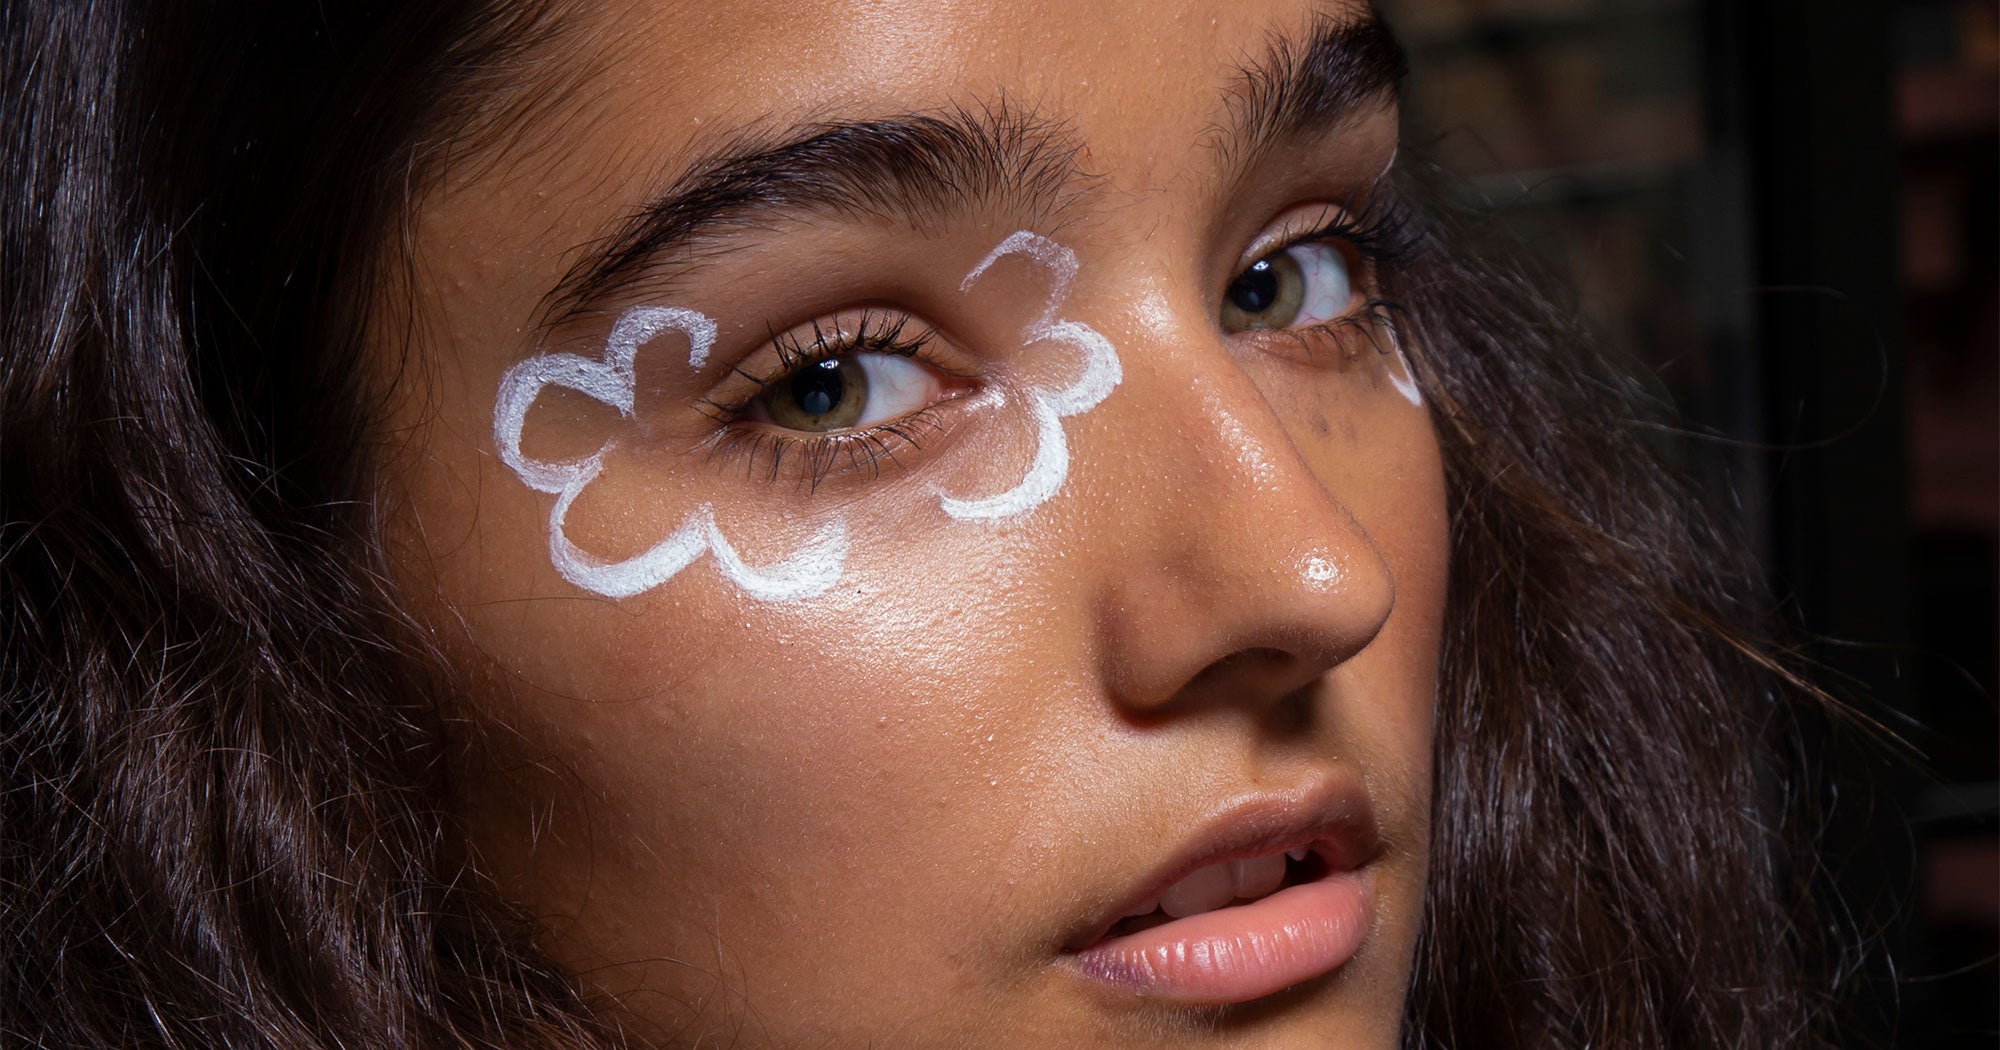 Cloud Eye Makeup Trend From Euphoria At NYFW How To